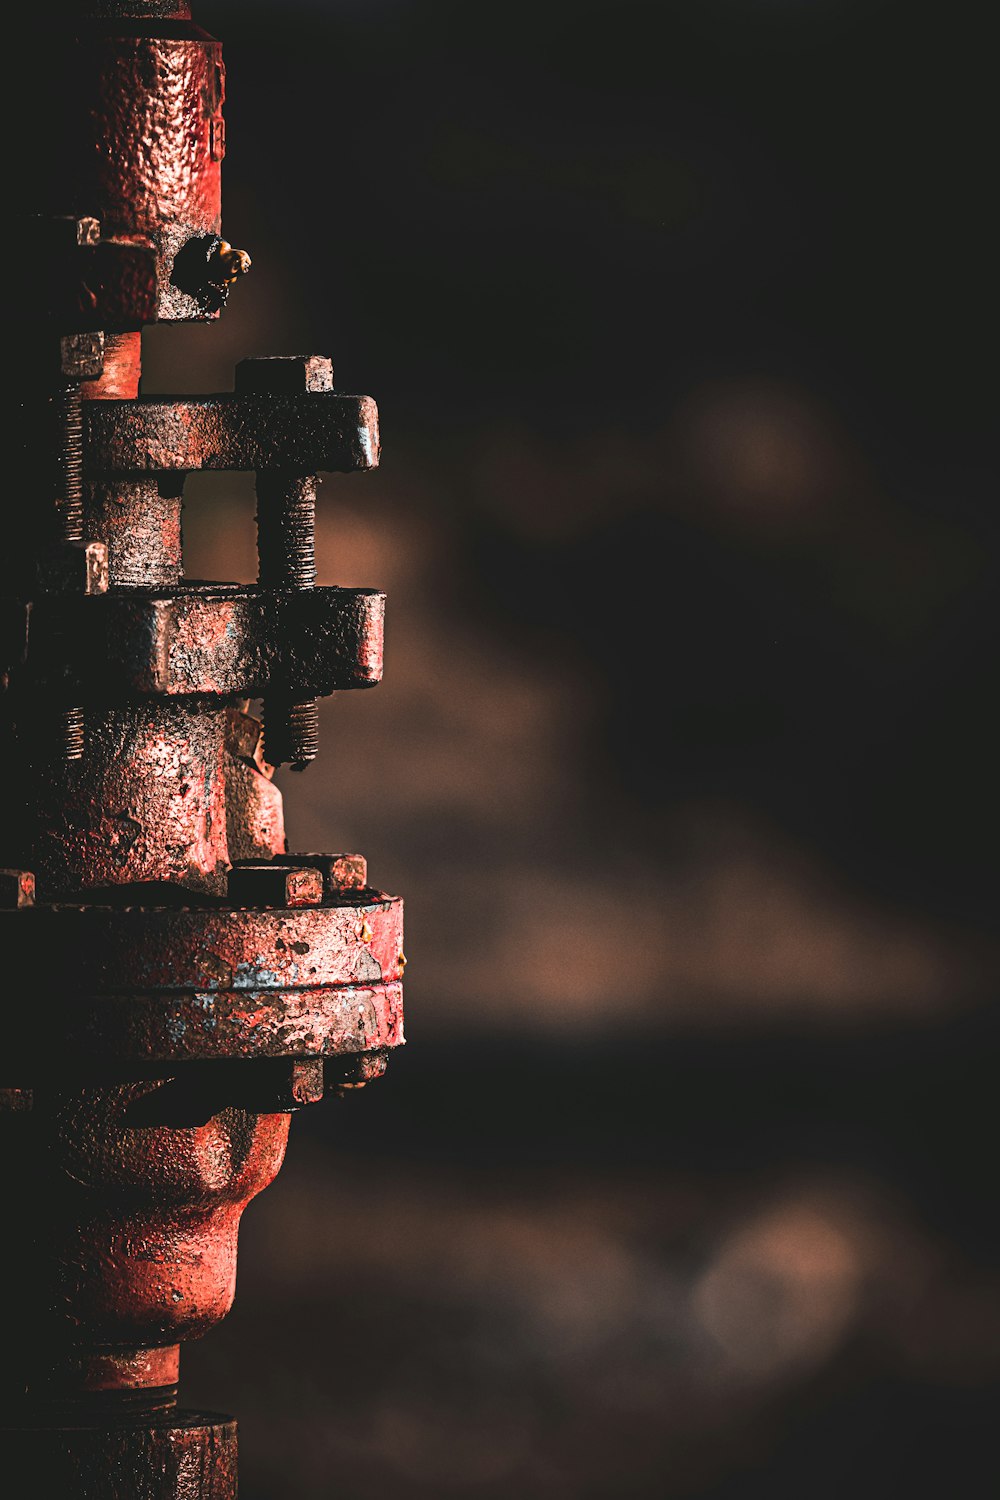 a rusted fire hydrant in the middle of the night